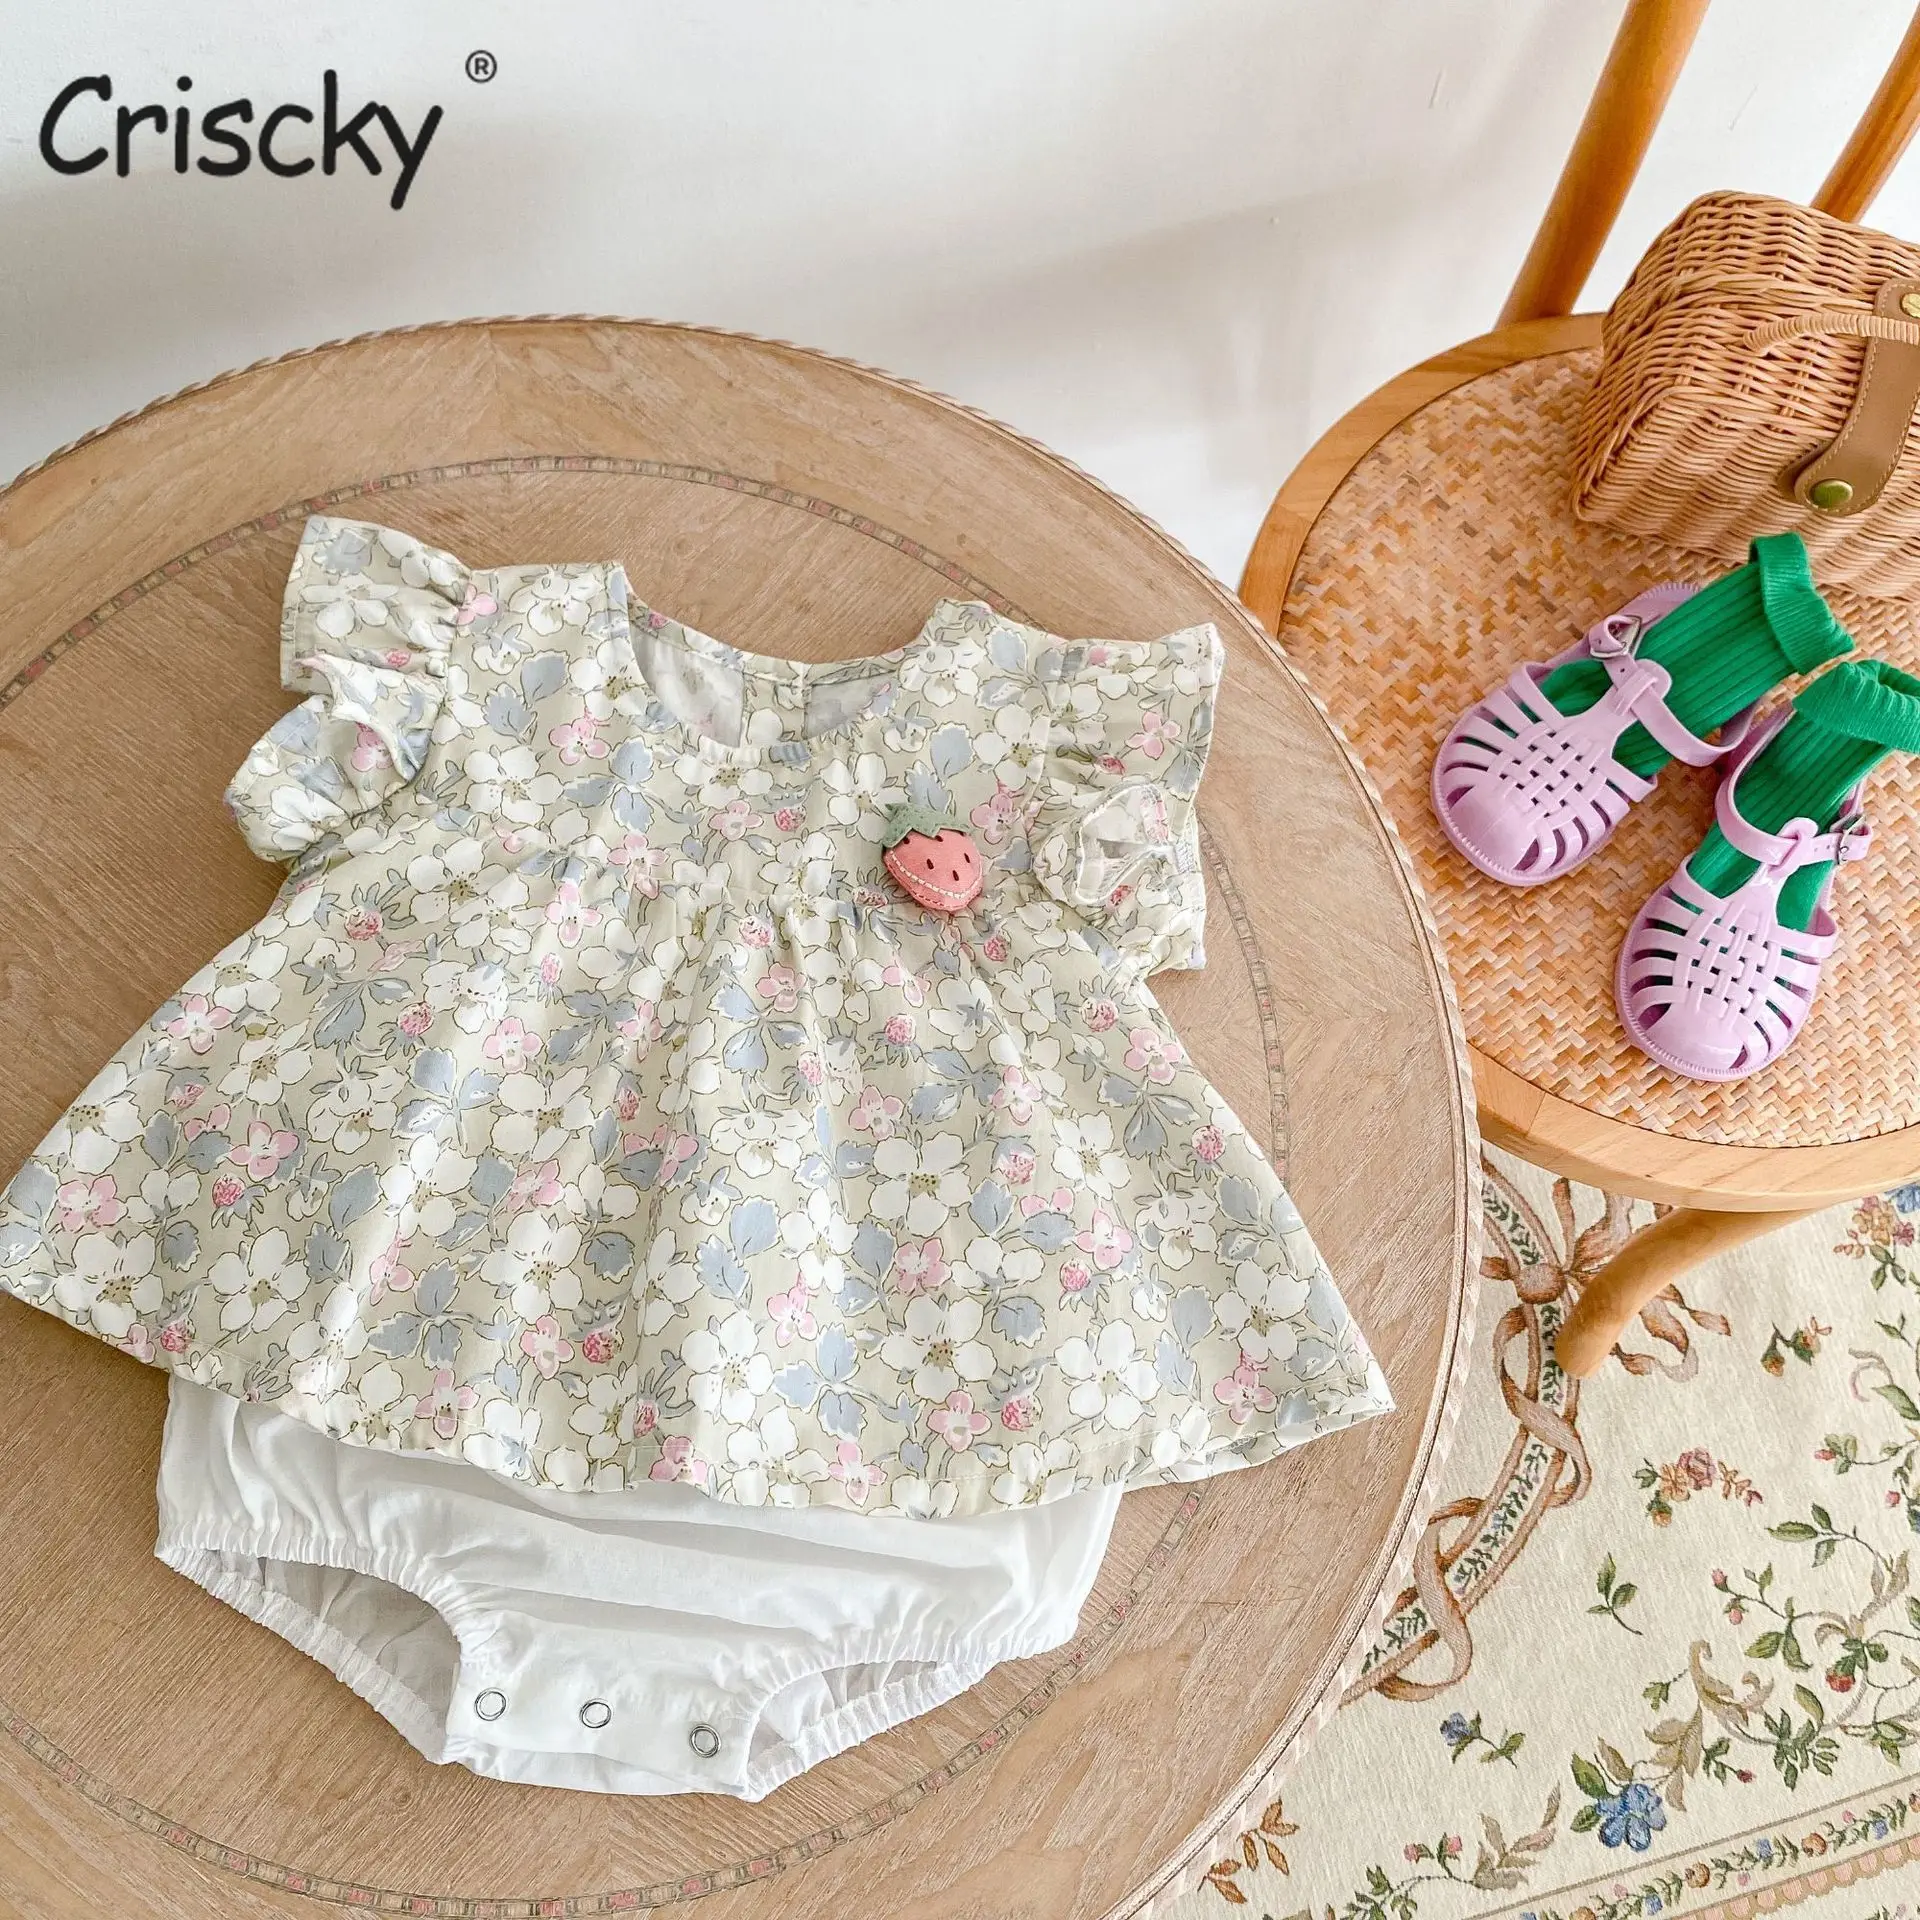 

Criscky Newborn Baby Girl Clothes Set Summer Printing Short Sleeve Romper Flower Shorts 2 PCS Outfit New Born Infant Clothing